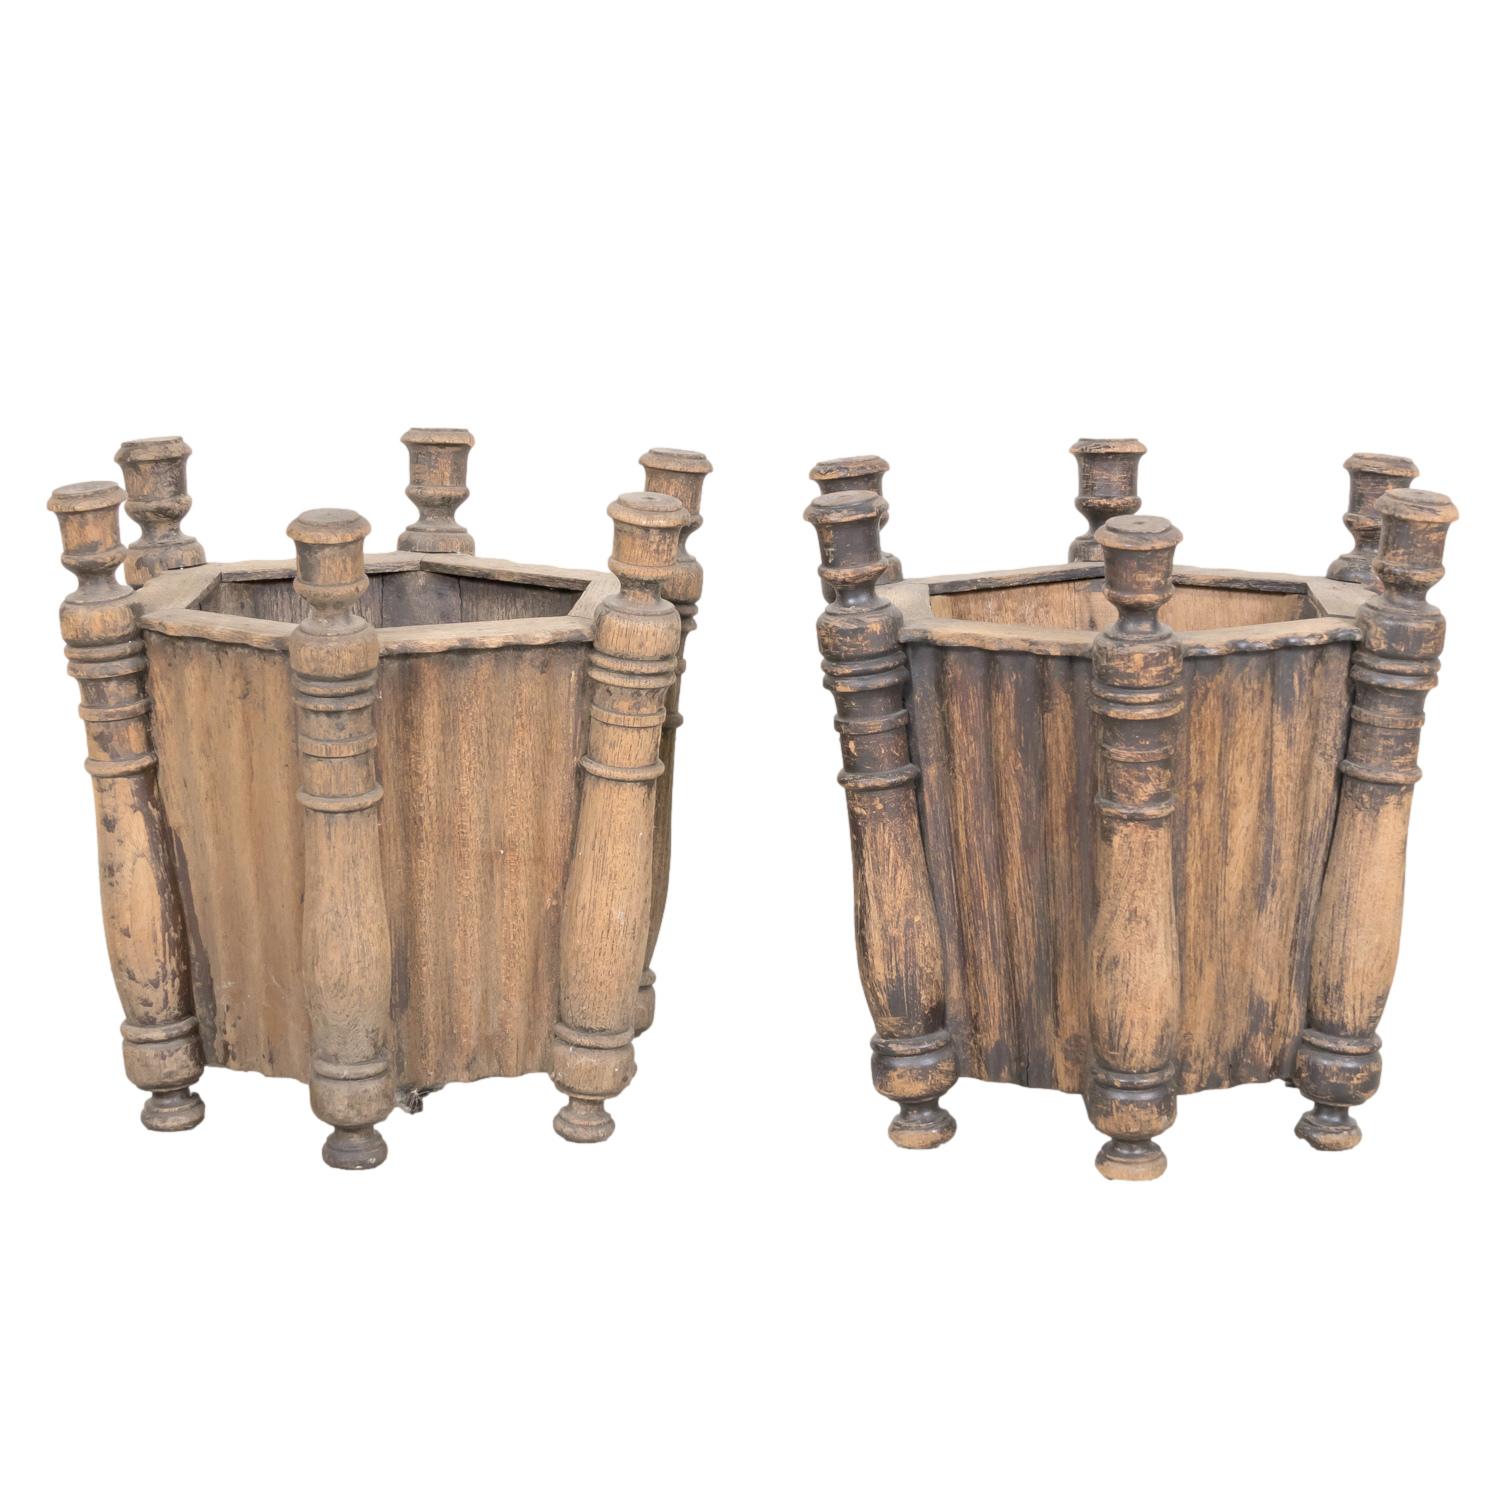 Pair of Antique French Carved Oak Hexagonal Planters or Jardinieres For Sale